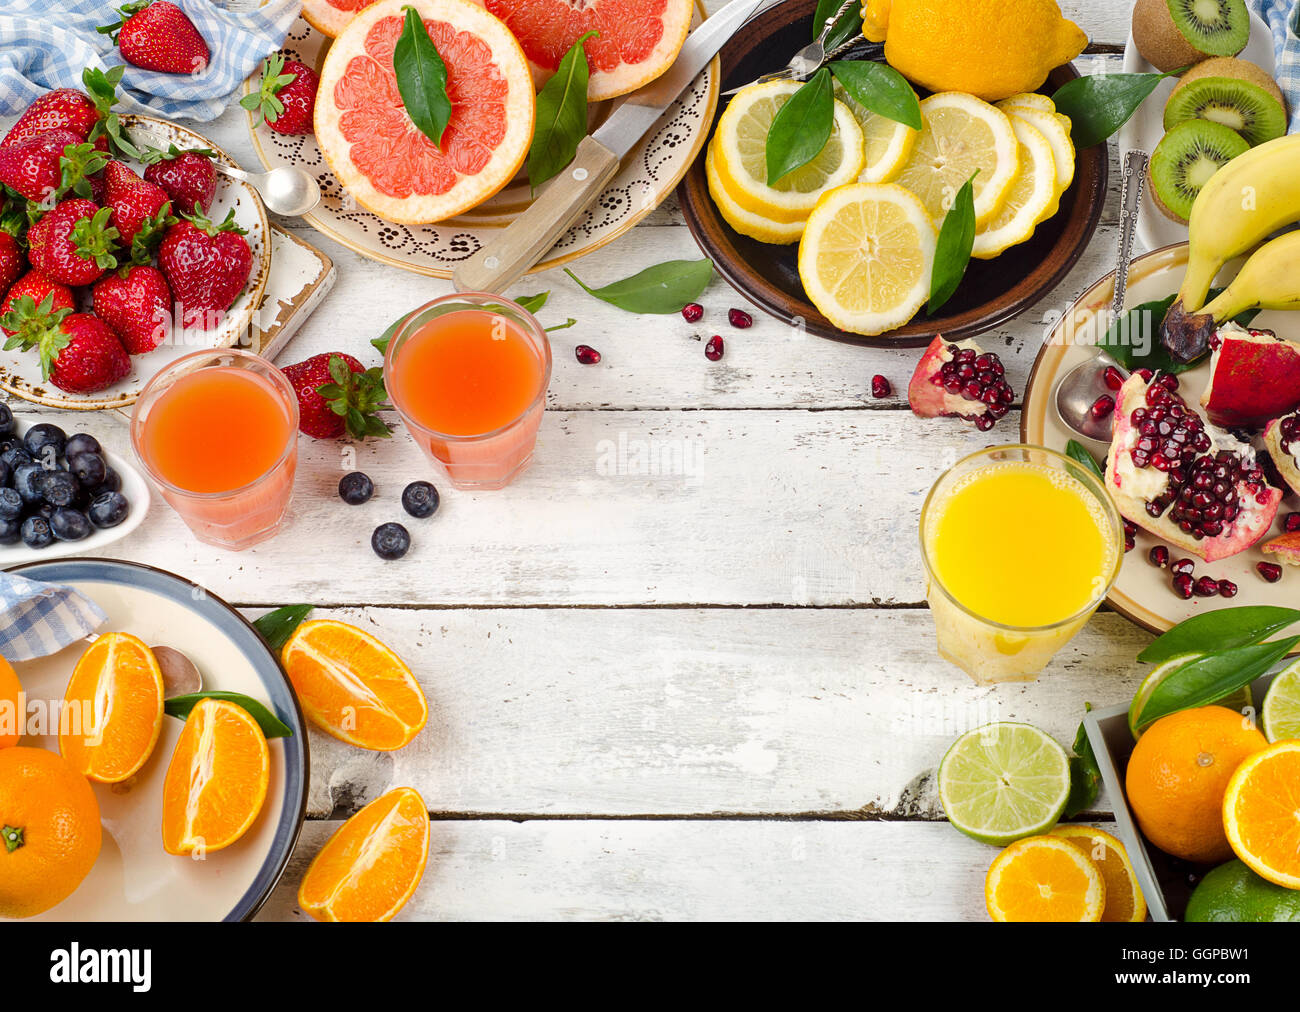 Citrus juice, fresh fruits and berries on white wooden background. Healthy eating, dieting. Top view Stock Photo